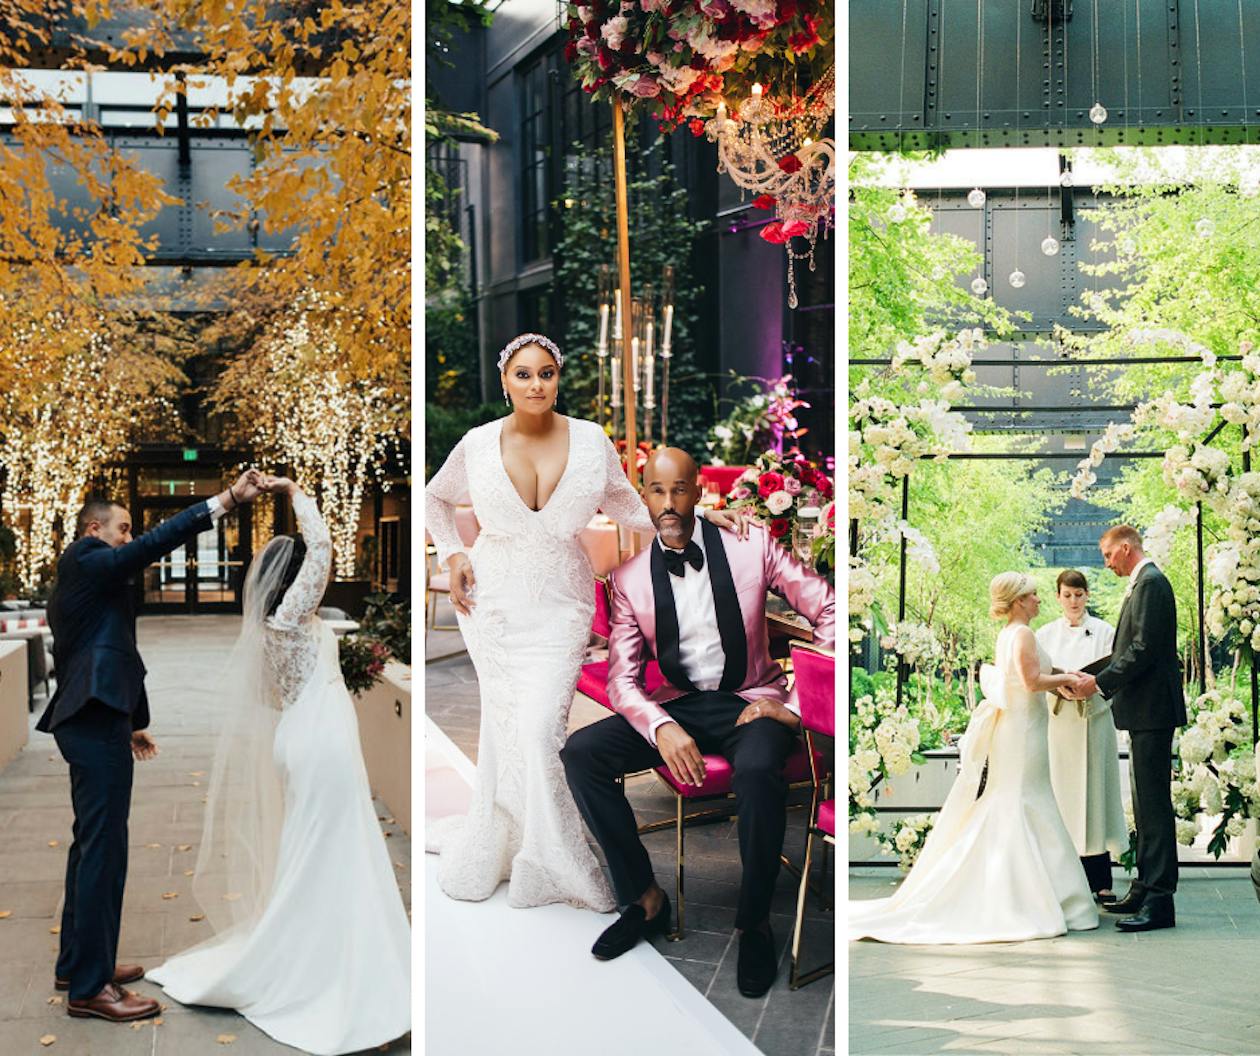 The Courtyard at the Sagamore Pendry Baltimore in three Different Wedding Seasons with Couples Dancing | PartySlate